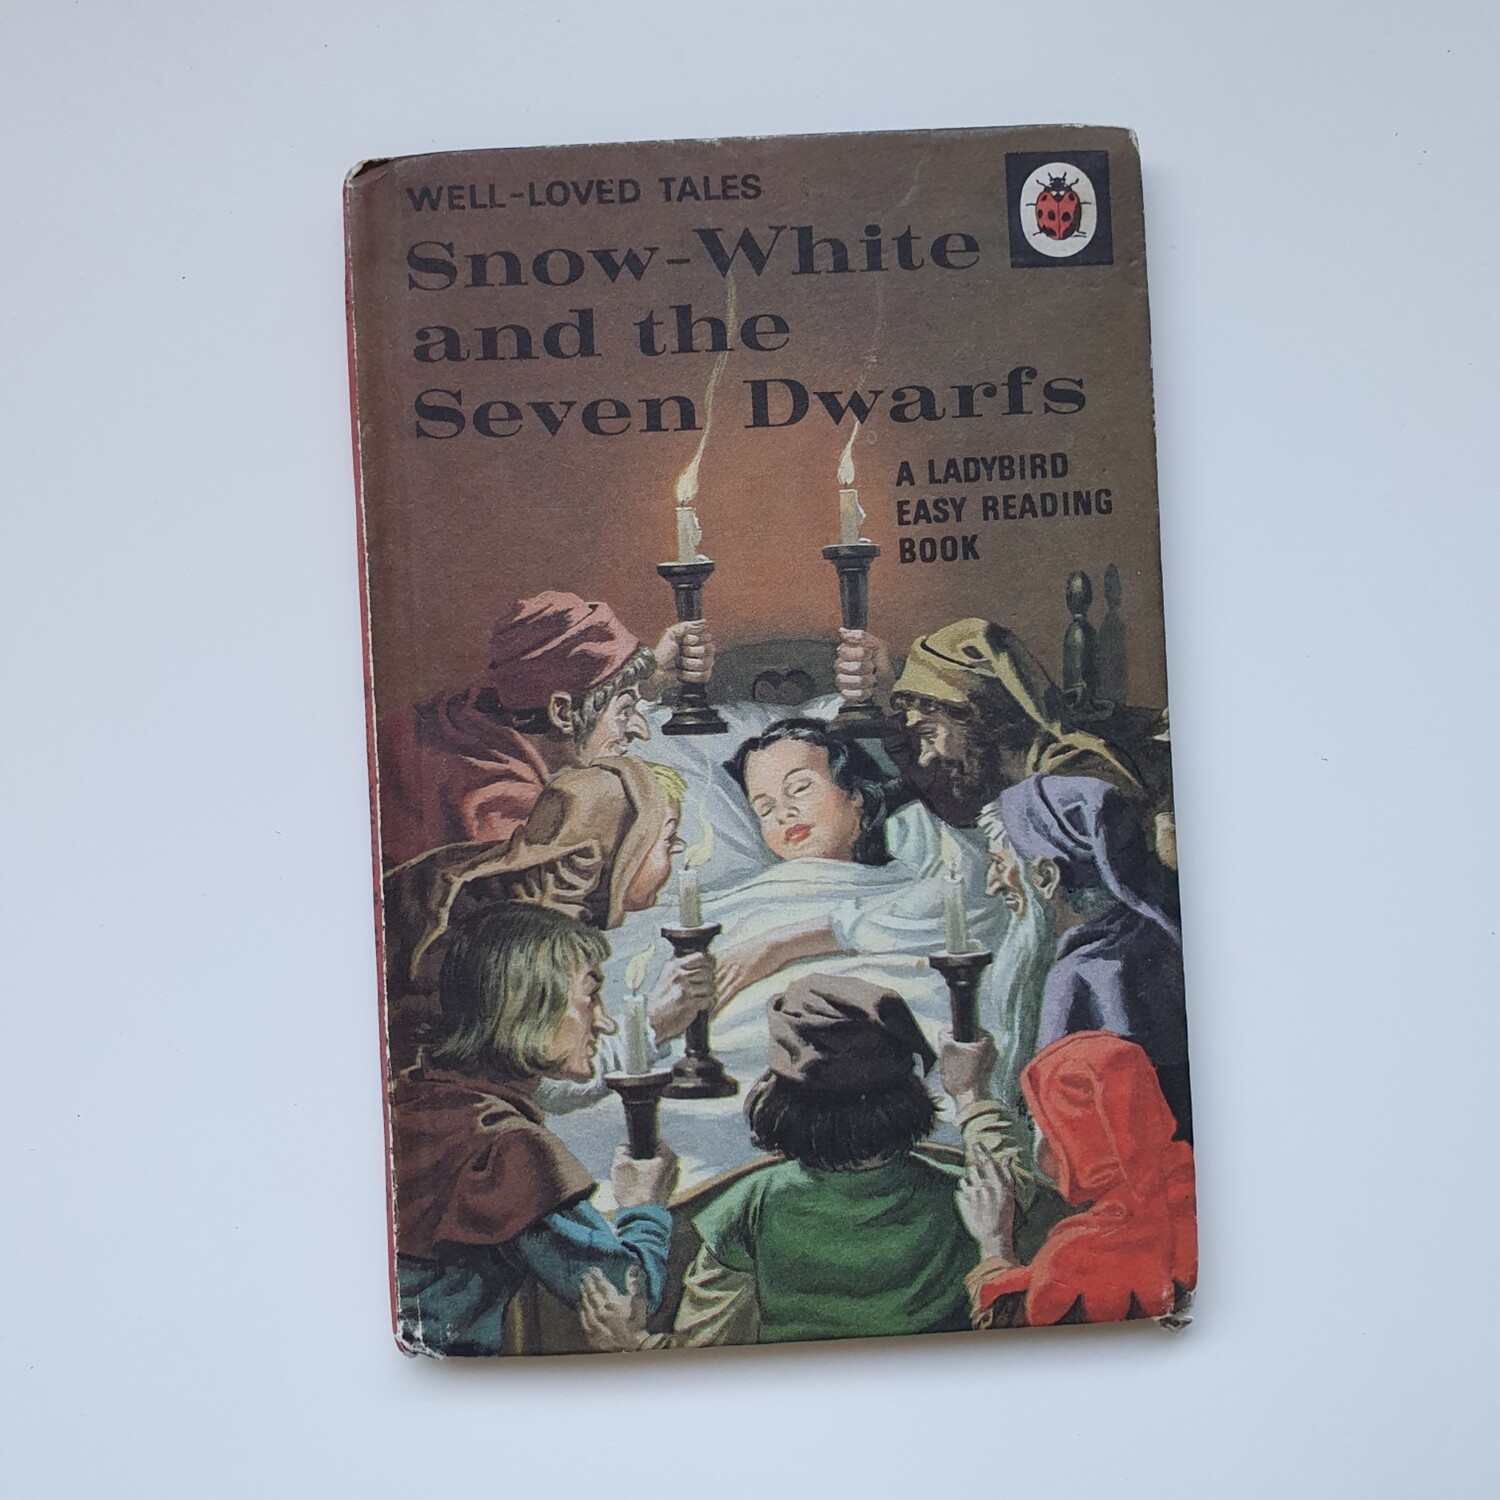 Snow White and the seven Dwarfs Notebook 1969 - Ladybird Book - Well Loved Tales